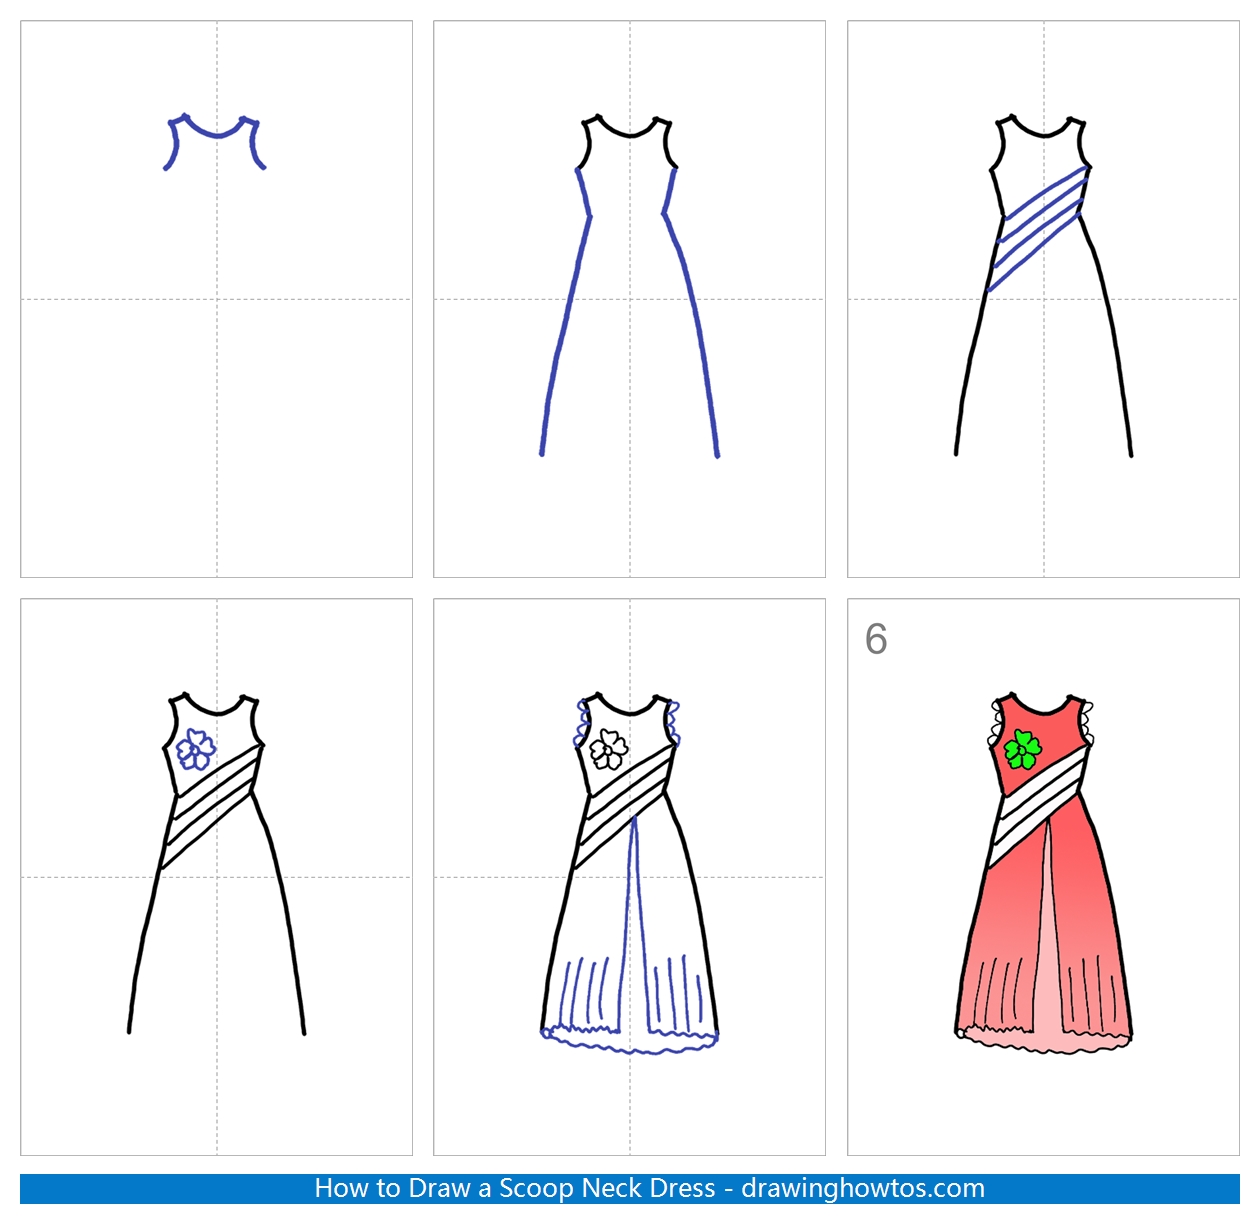 How to Draw a Scoop Neck Dress Step by Step